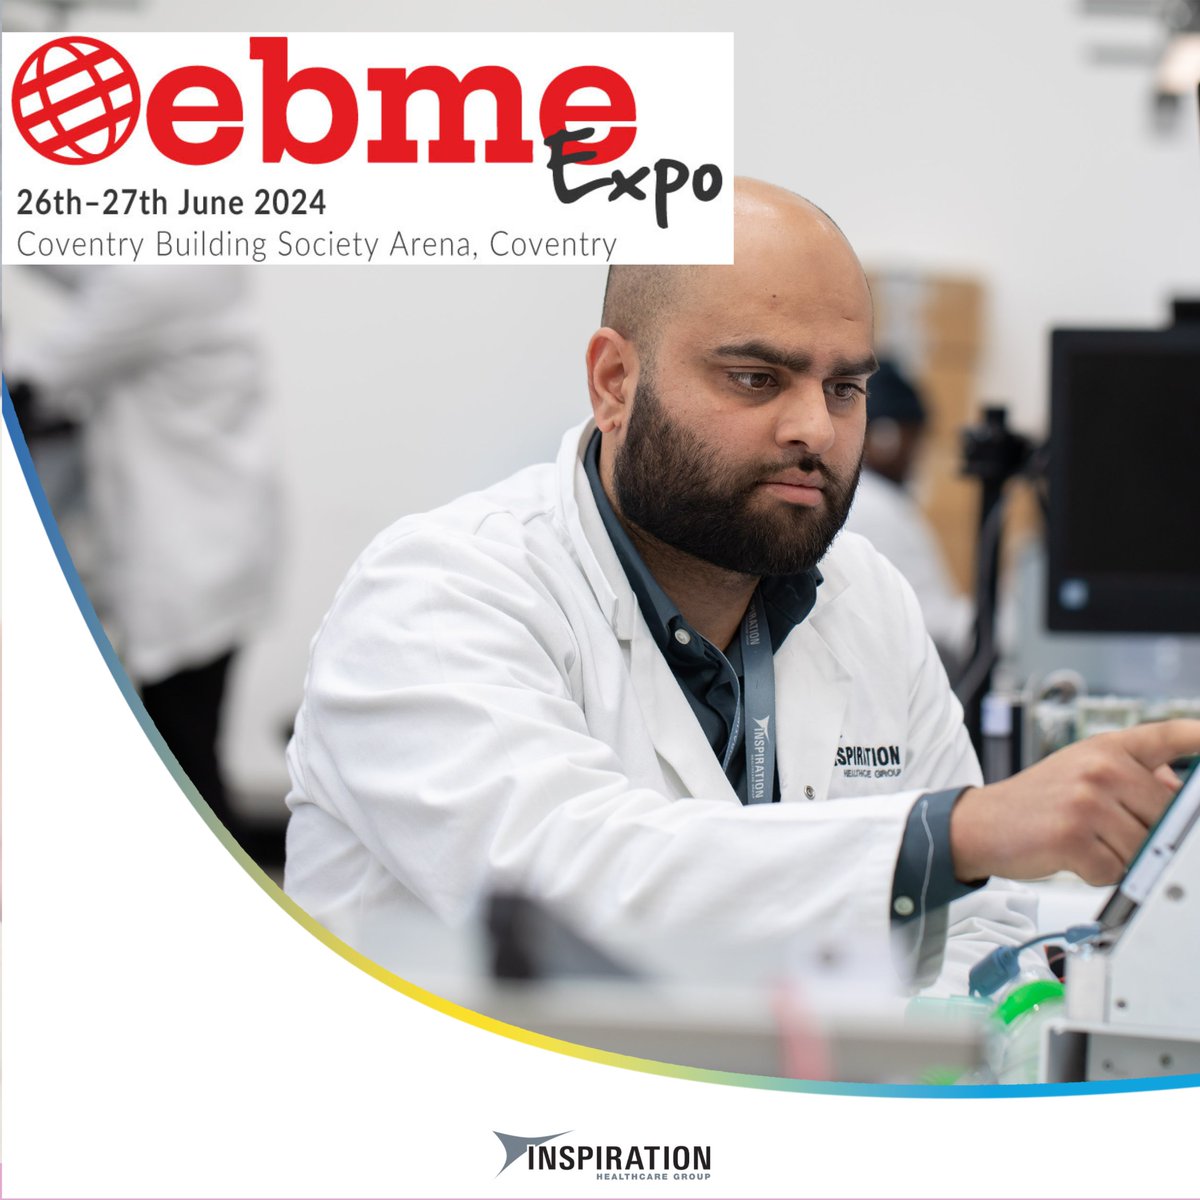 Inspiration Healthcare are pleased to announce that we will be showcasing our Neonatal & Infusion Therapy product ranges , at the EBME Expo on 26-27th June at The Coventry Building Society Arena. Stand H07. #HealthcareInnovations #MedicalEquipmentTechnology #EBME